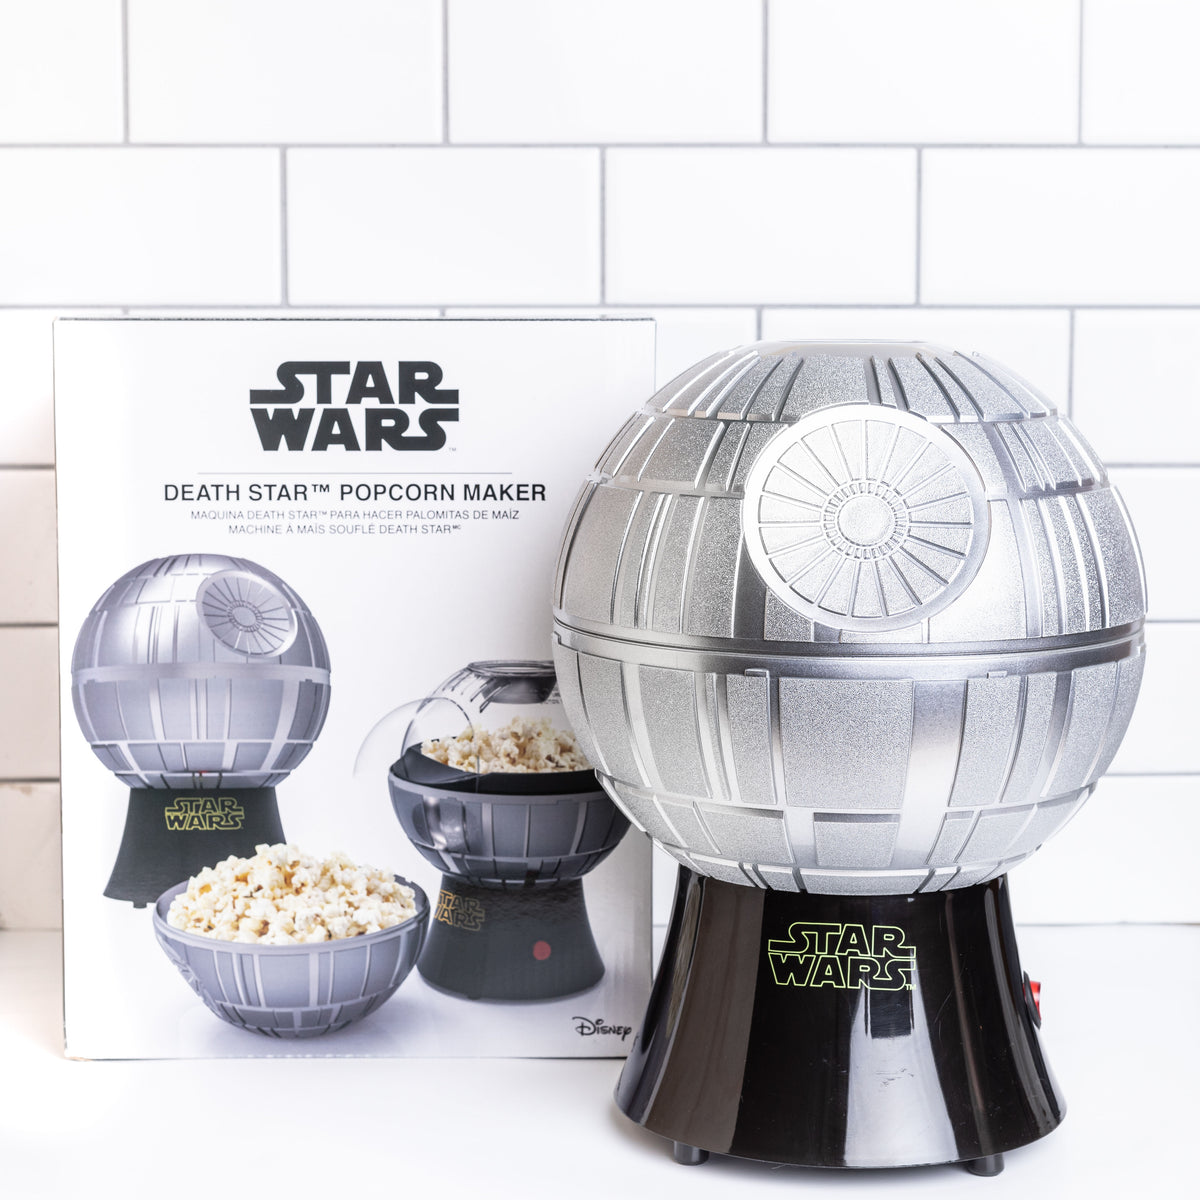 How to clean a popcorn maker?